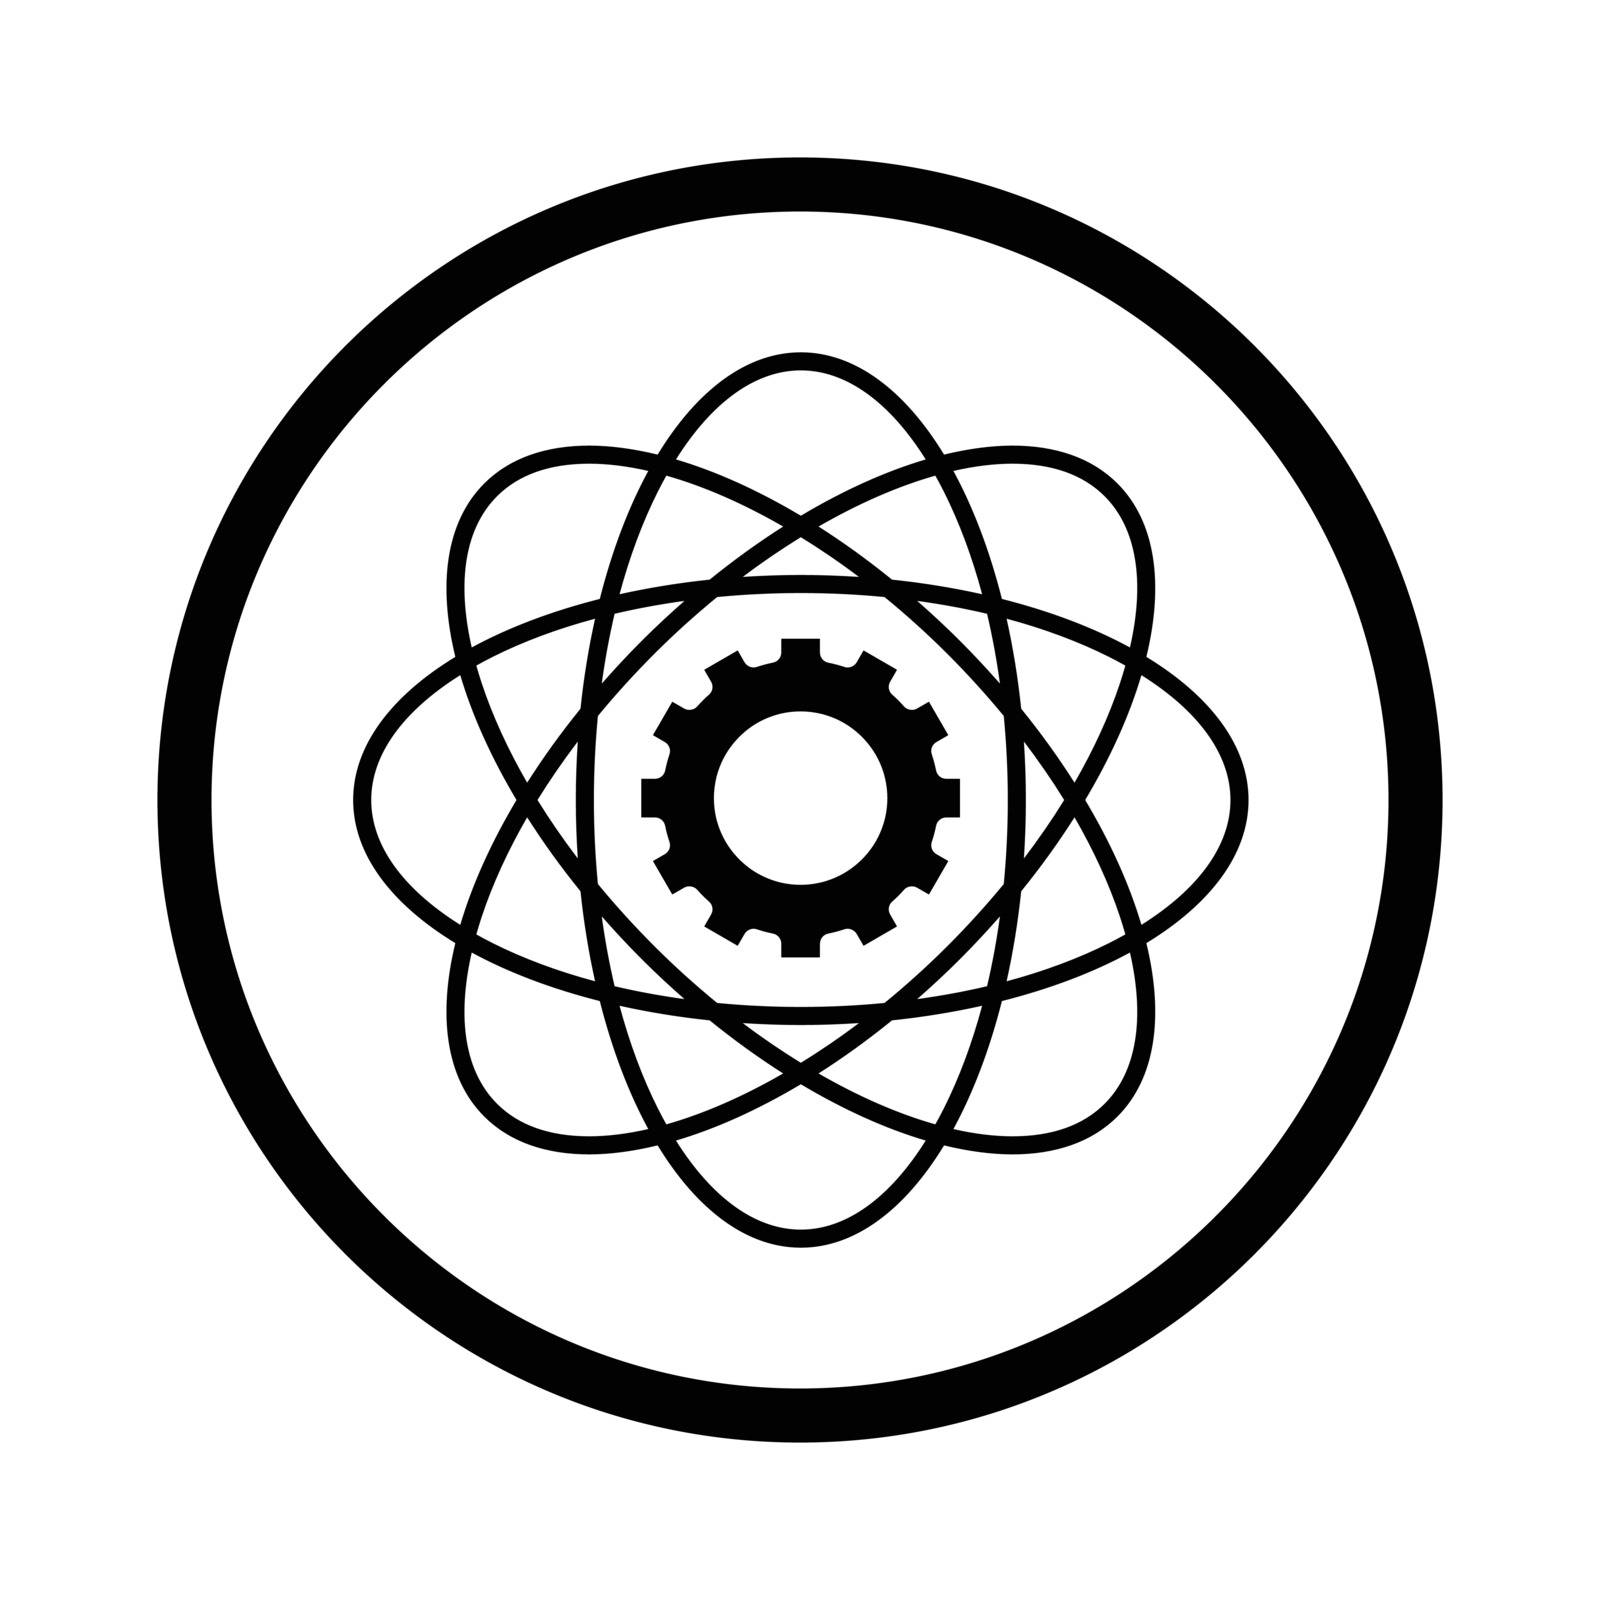 Science icon - vector iconic design by solargaria